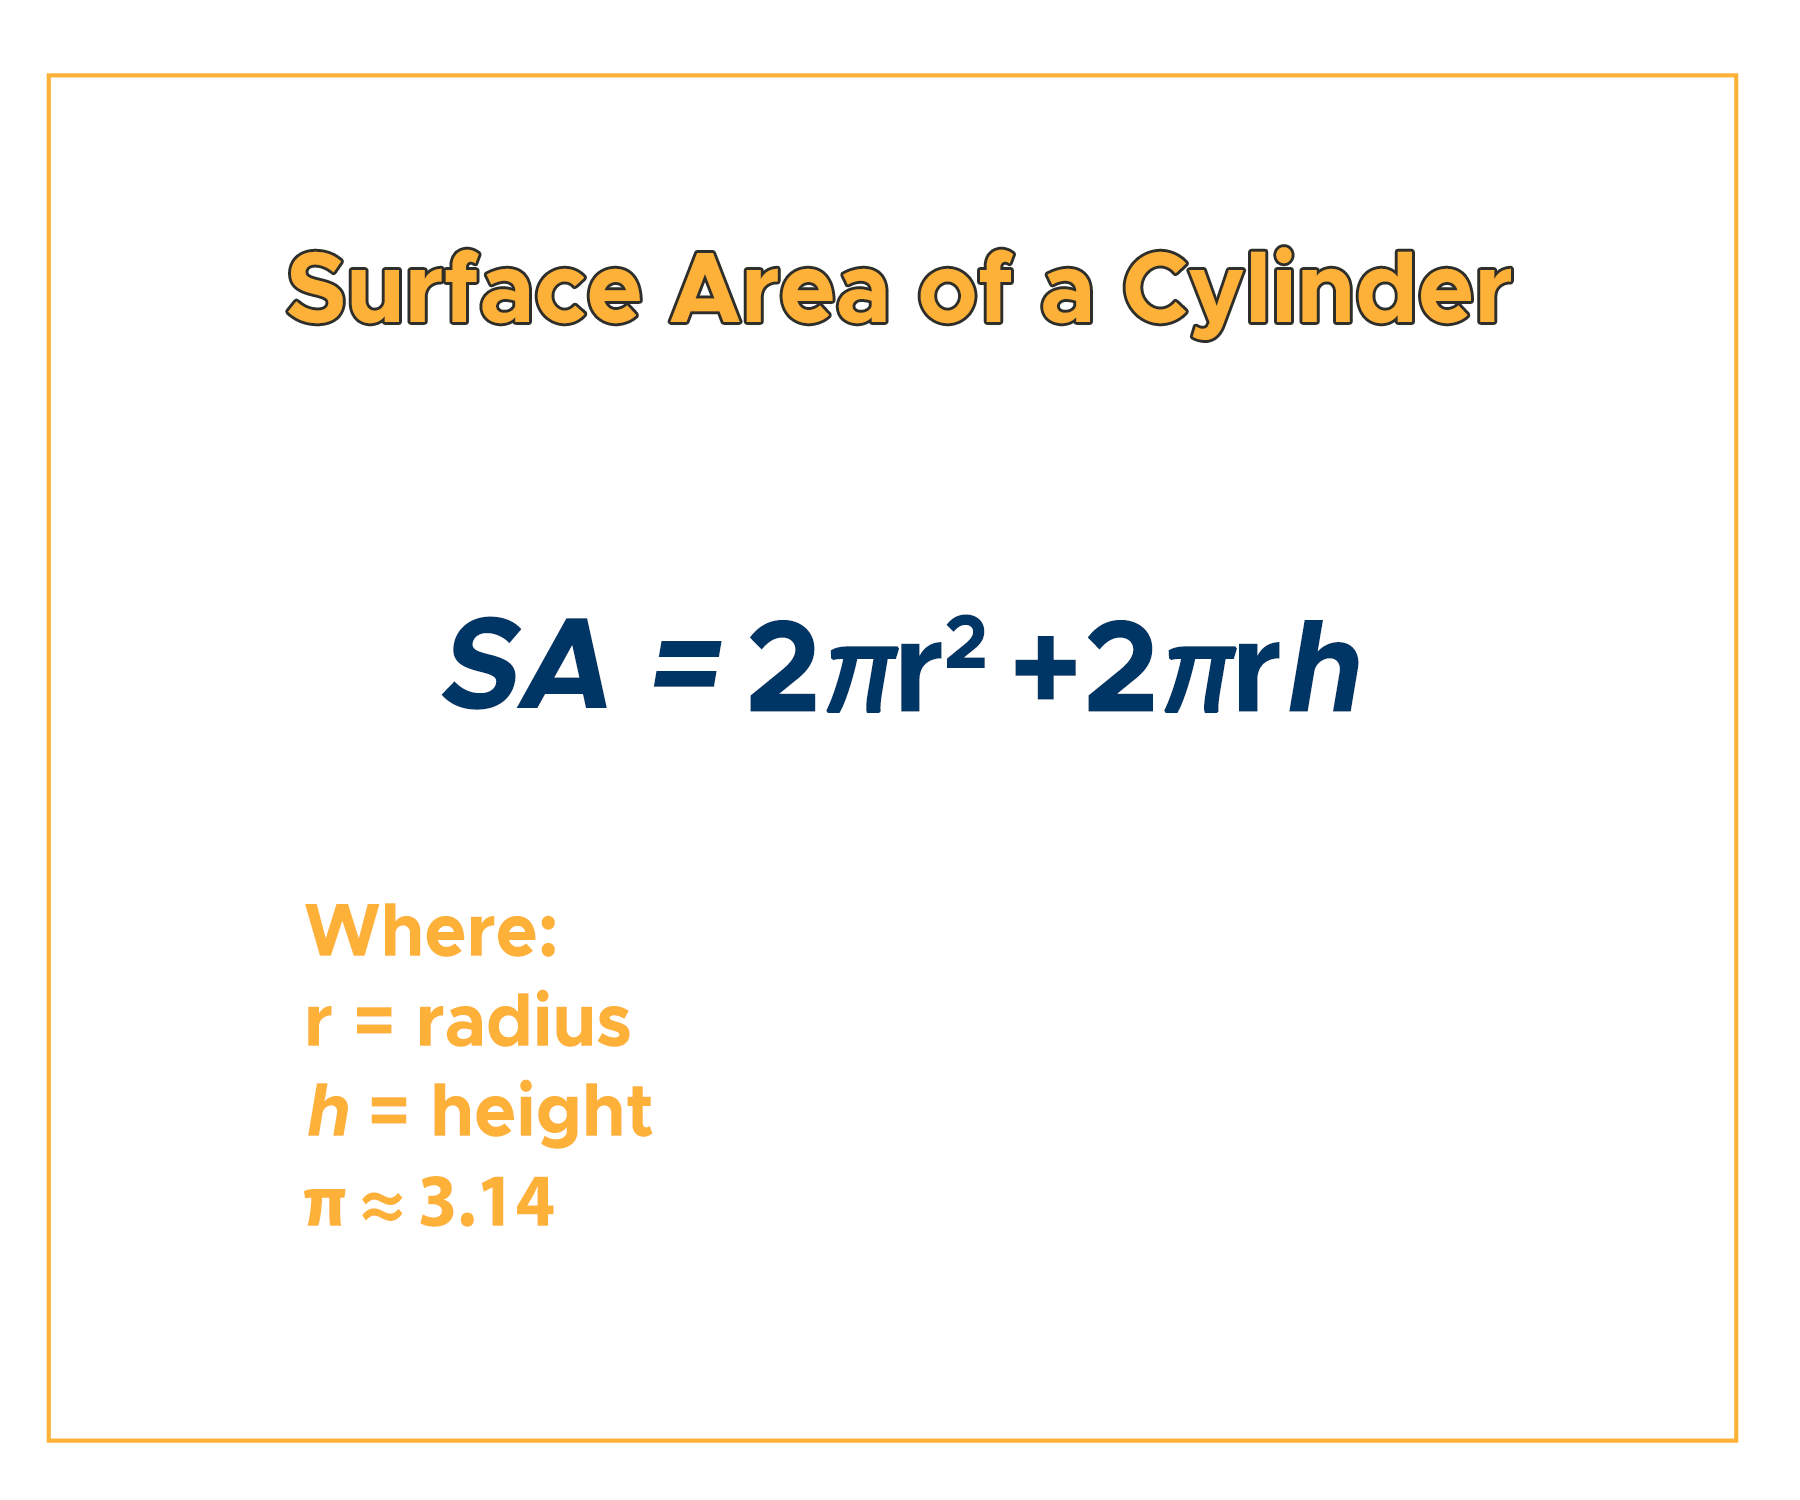 Surface Area of a Cylinder Equation